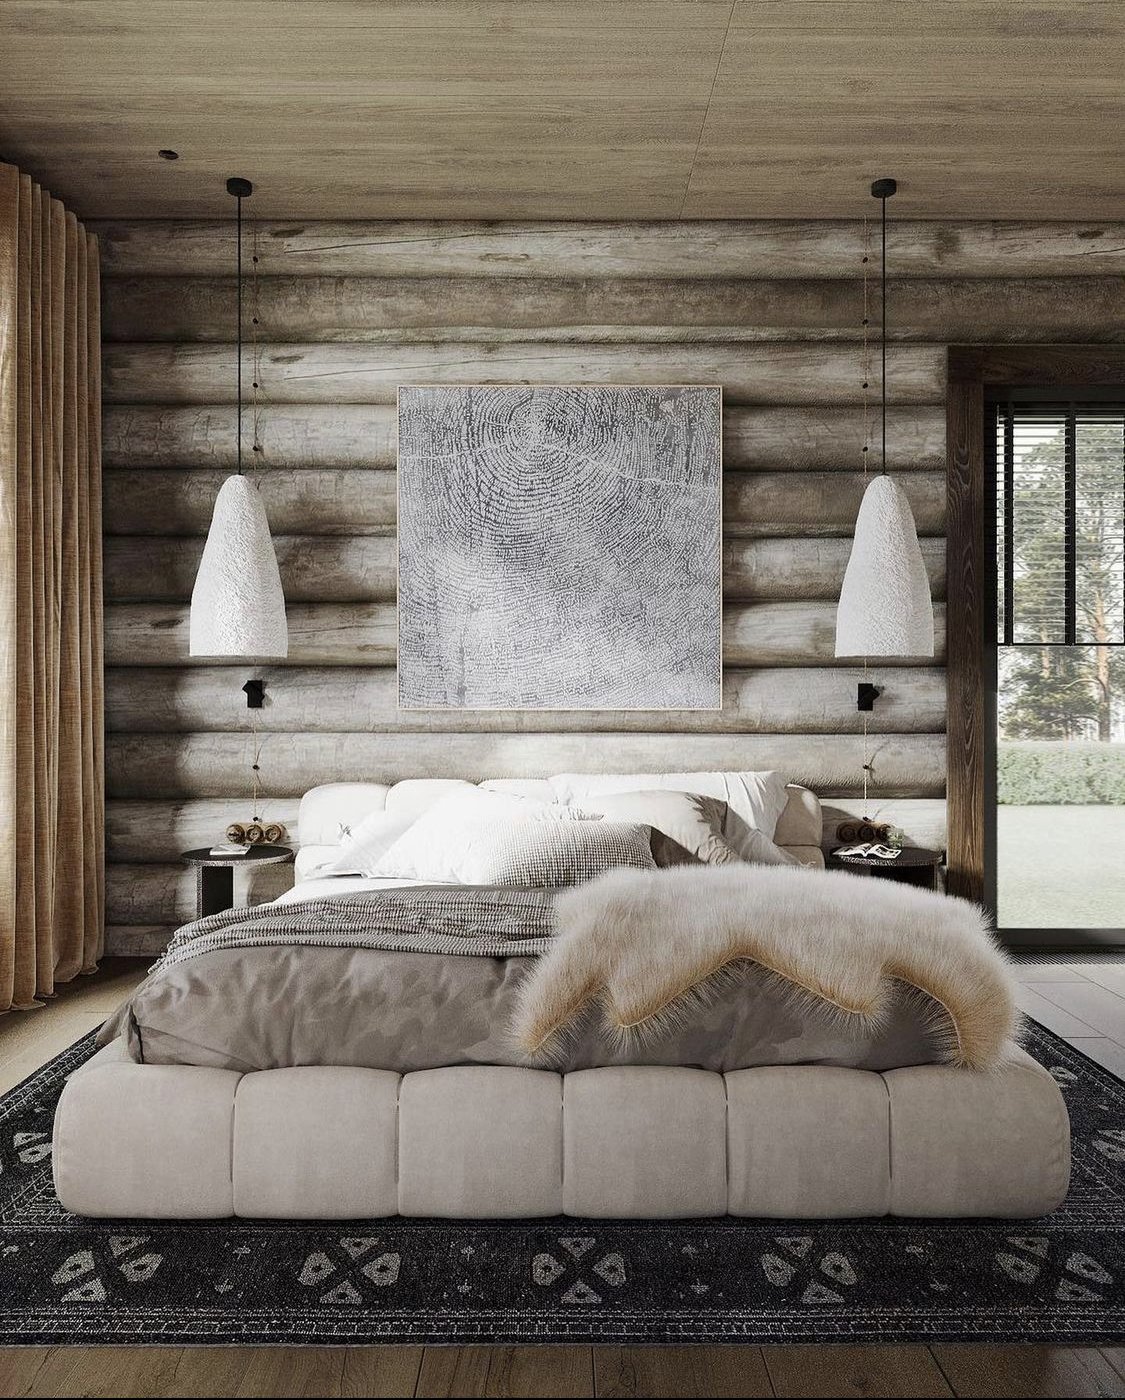 Luxury and rustic all in one